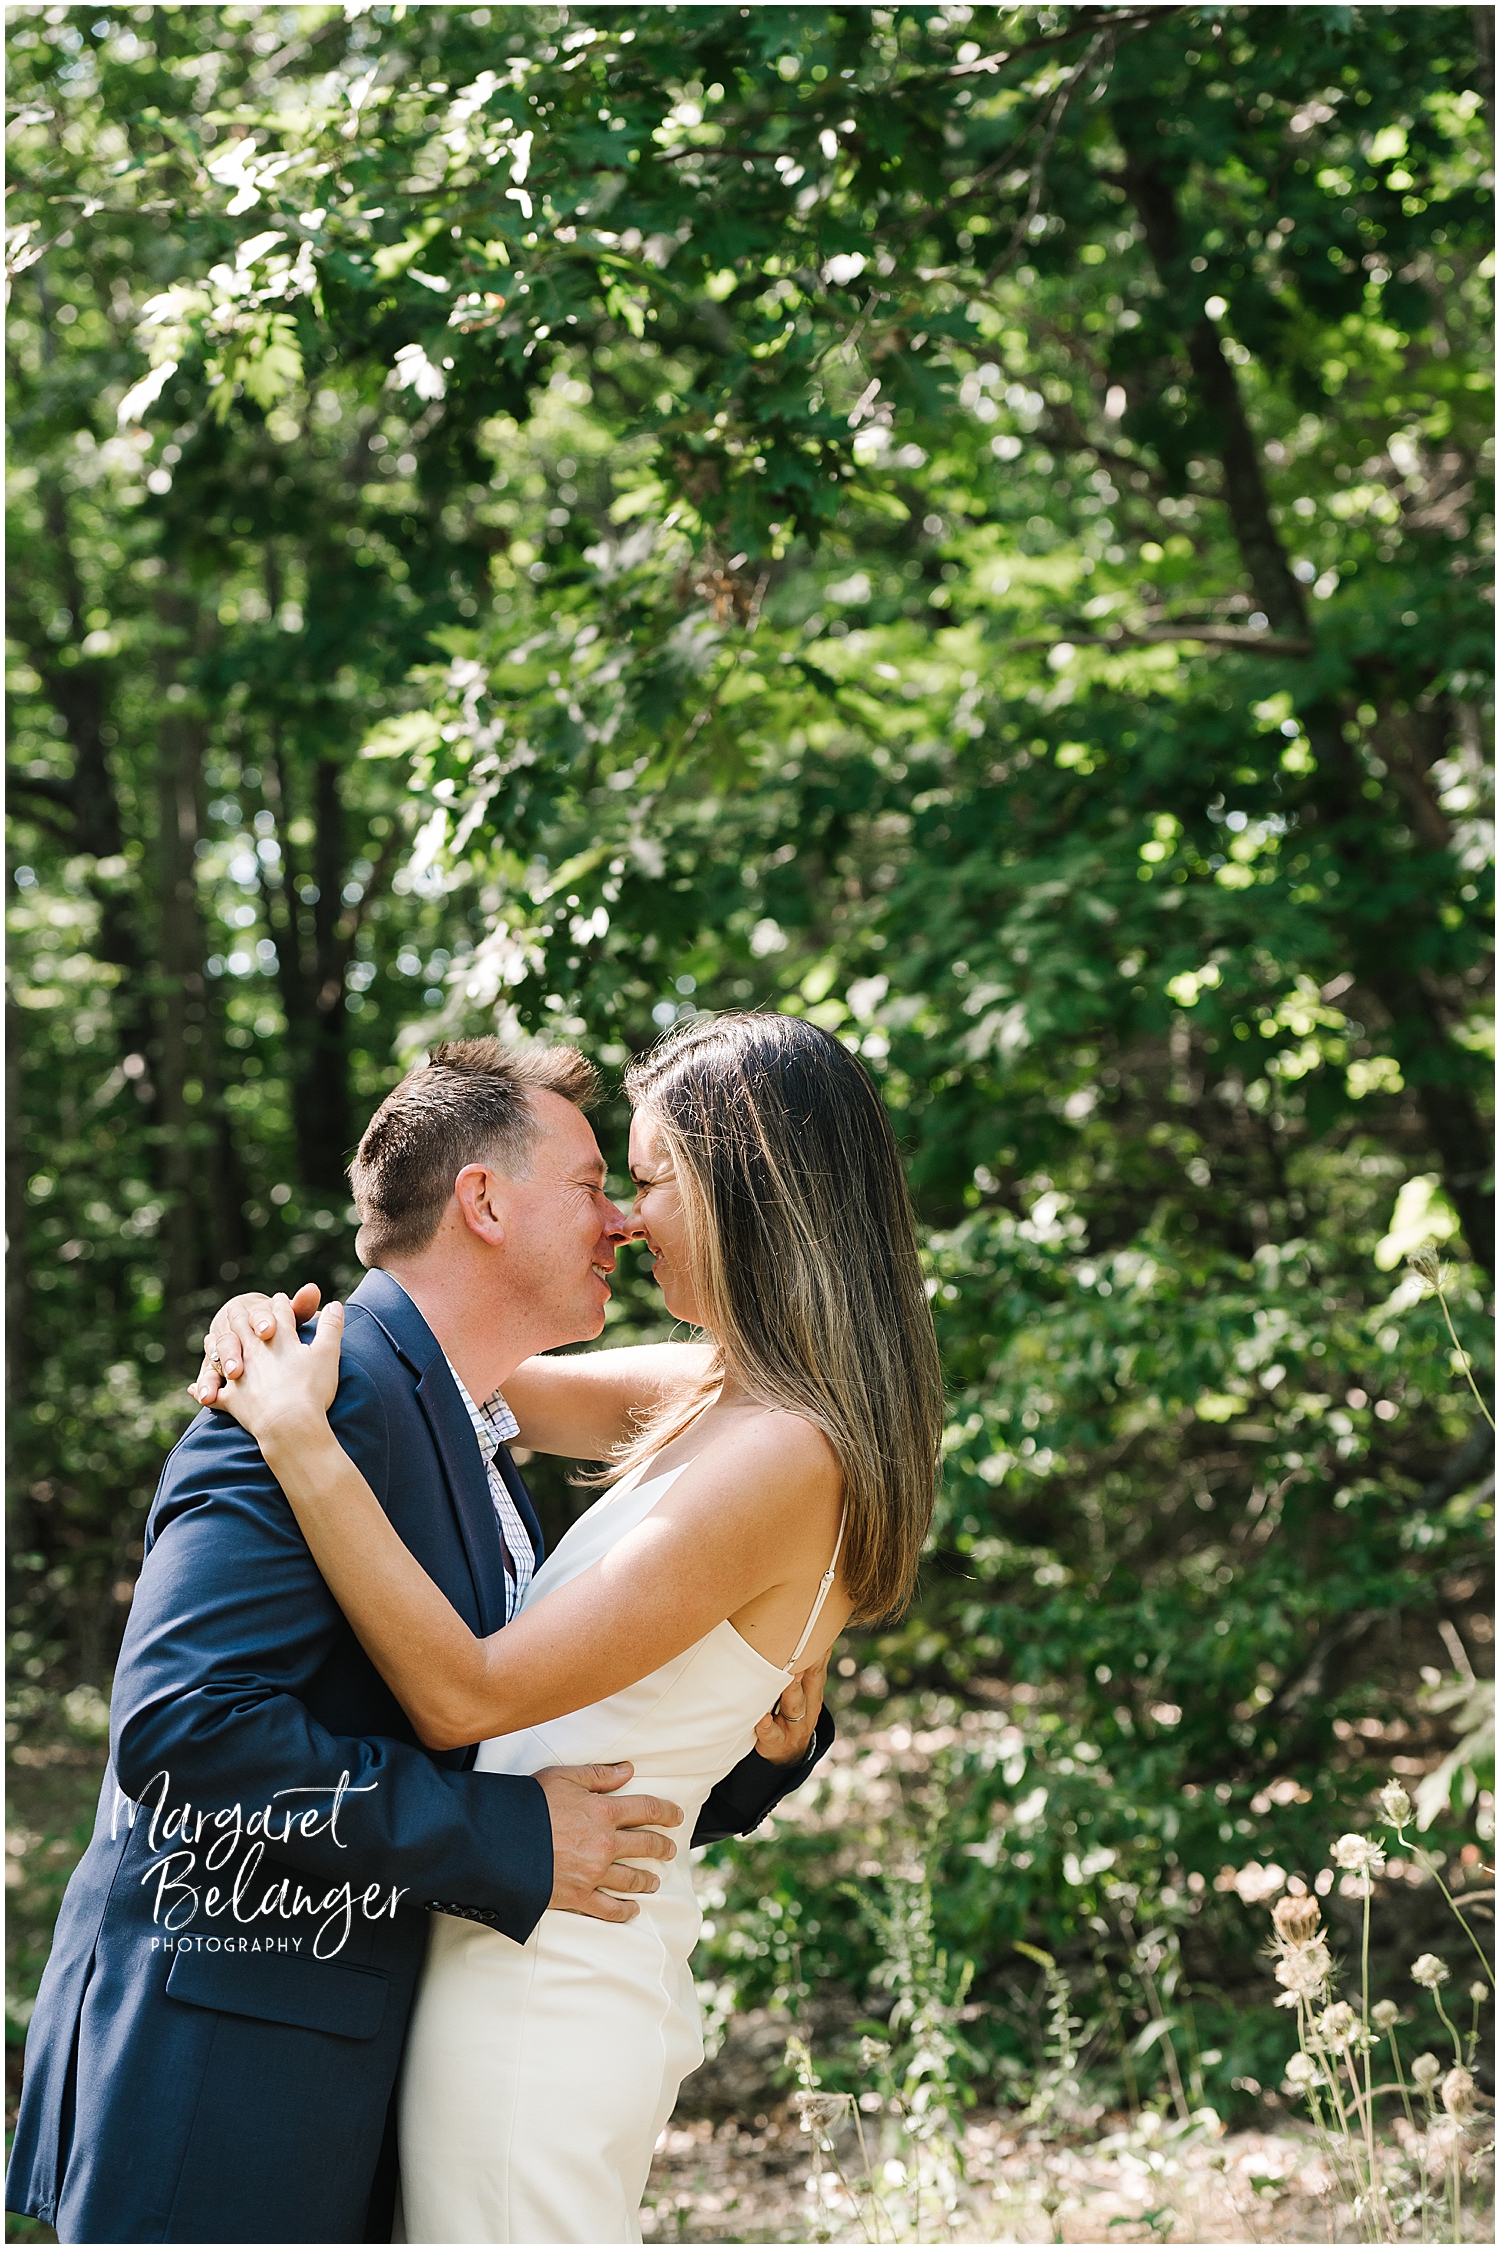 A couple embracing in a sunlit forest clearing.